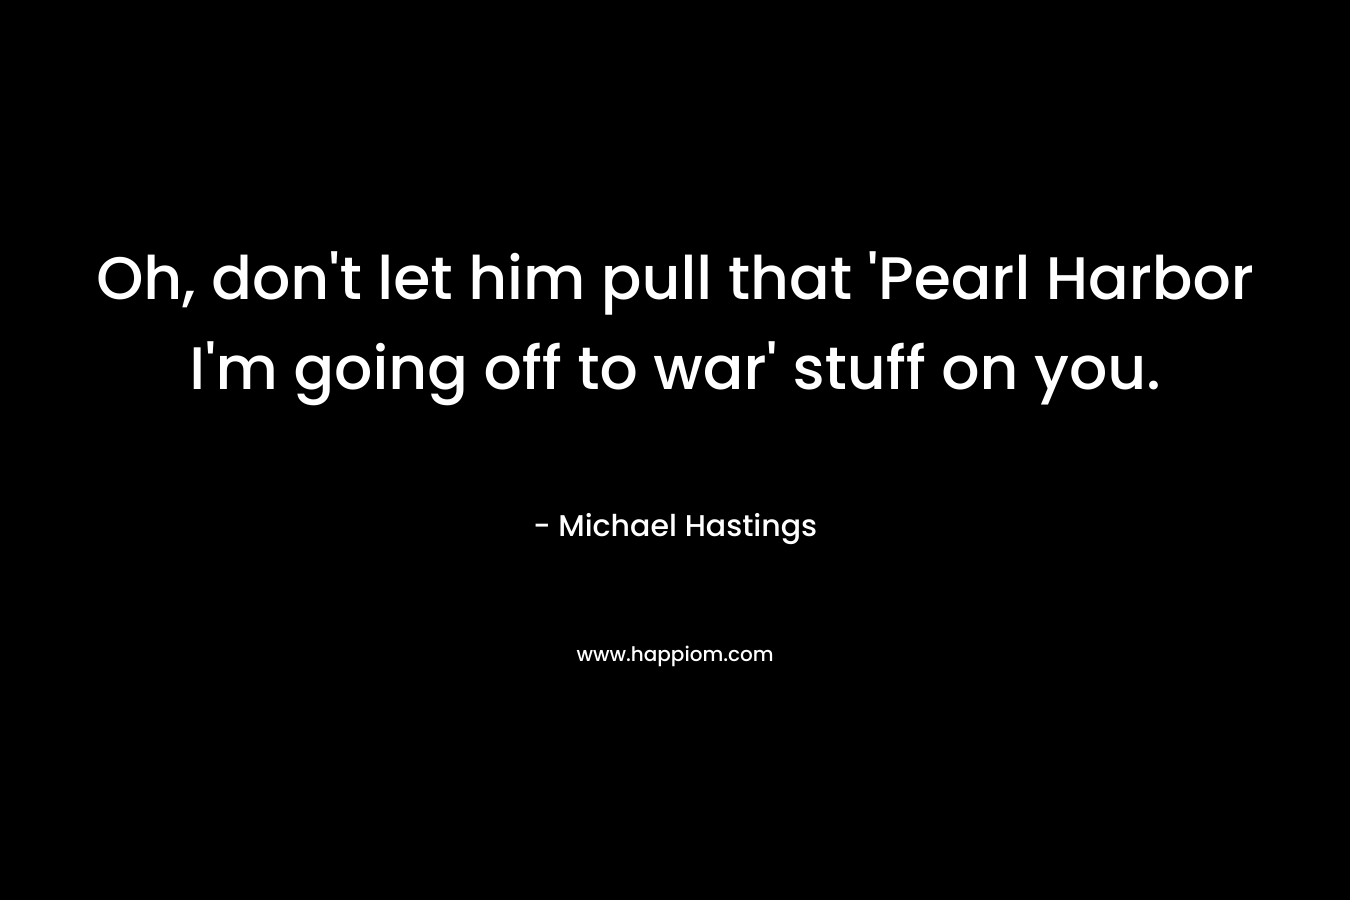 Oh, don’t let him pull that ‘Pearl Harbor I’m going off to war’ stuff on you. – Michael Hastings